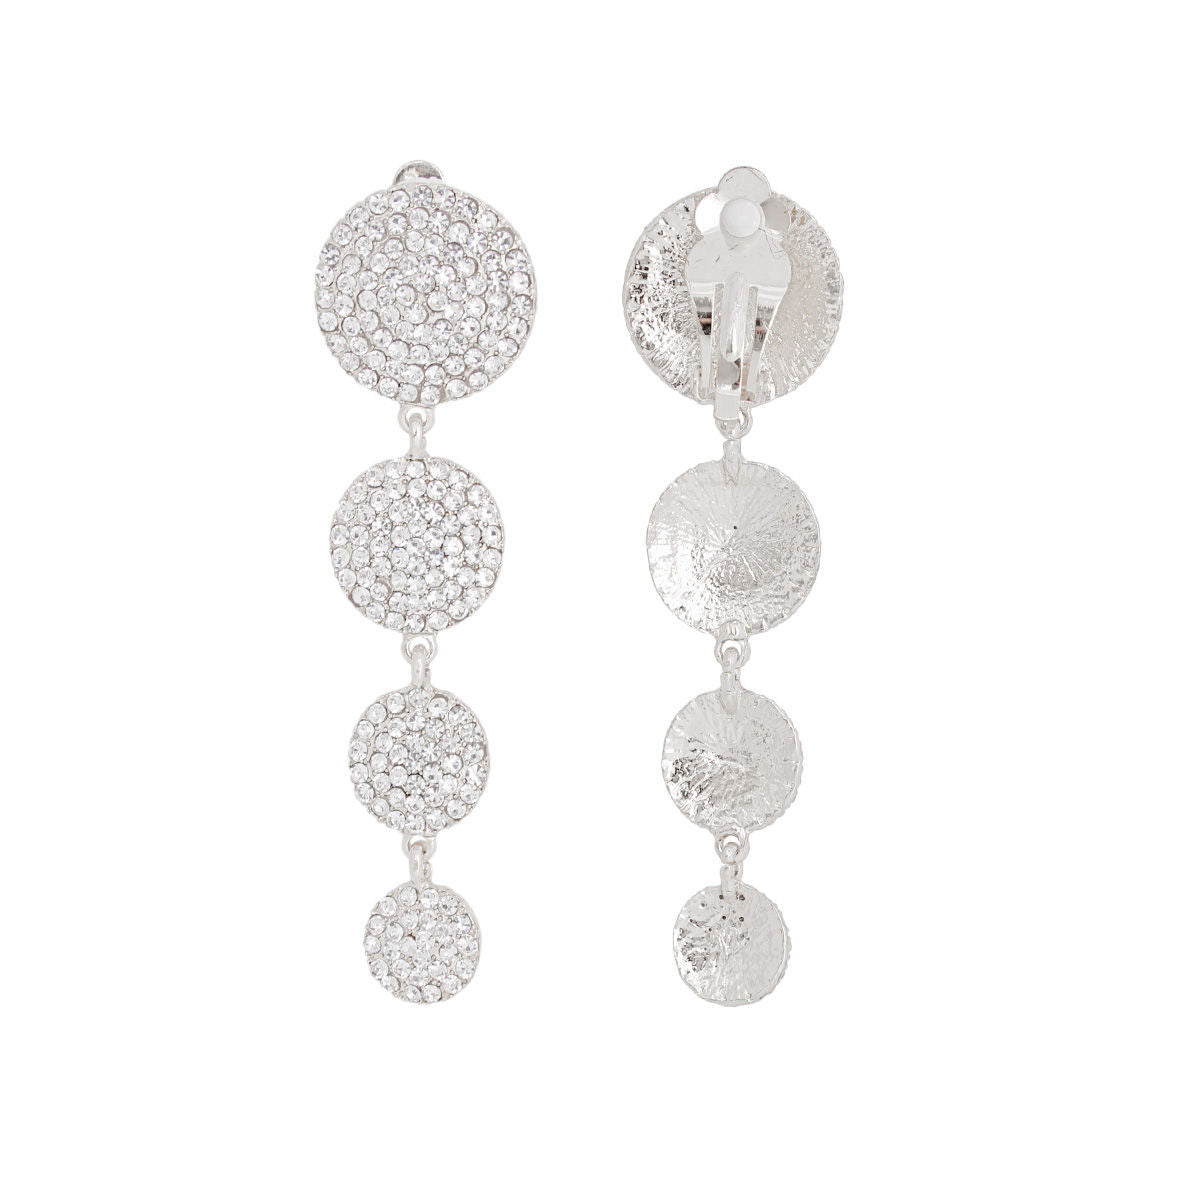 Clip On Silver Pave Disc Drop Earrings for Women